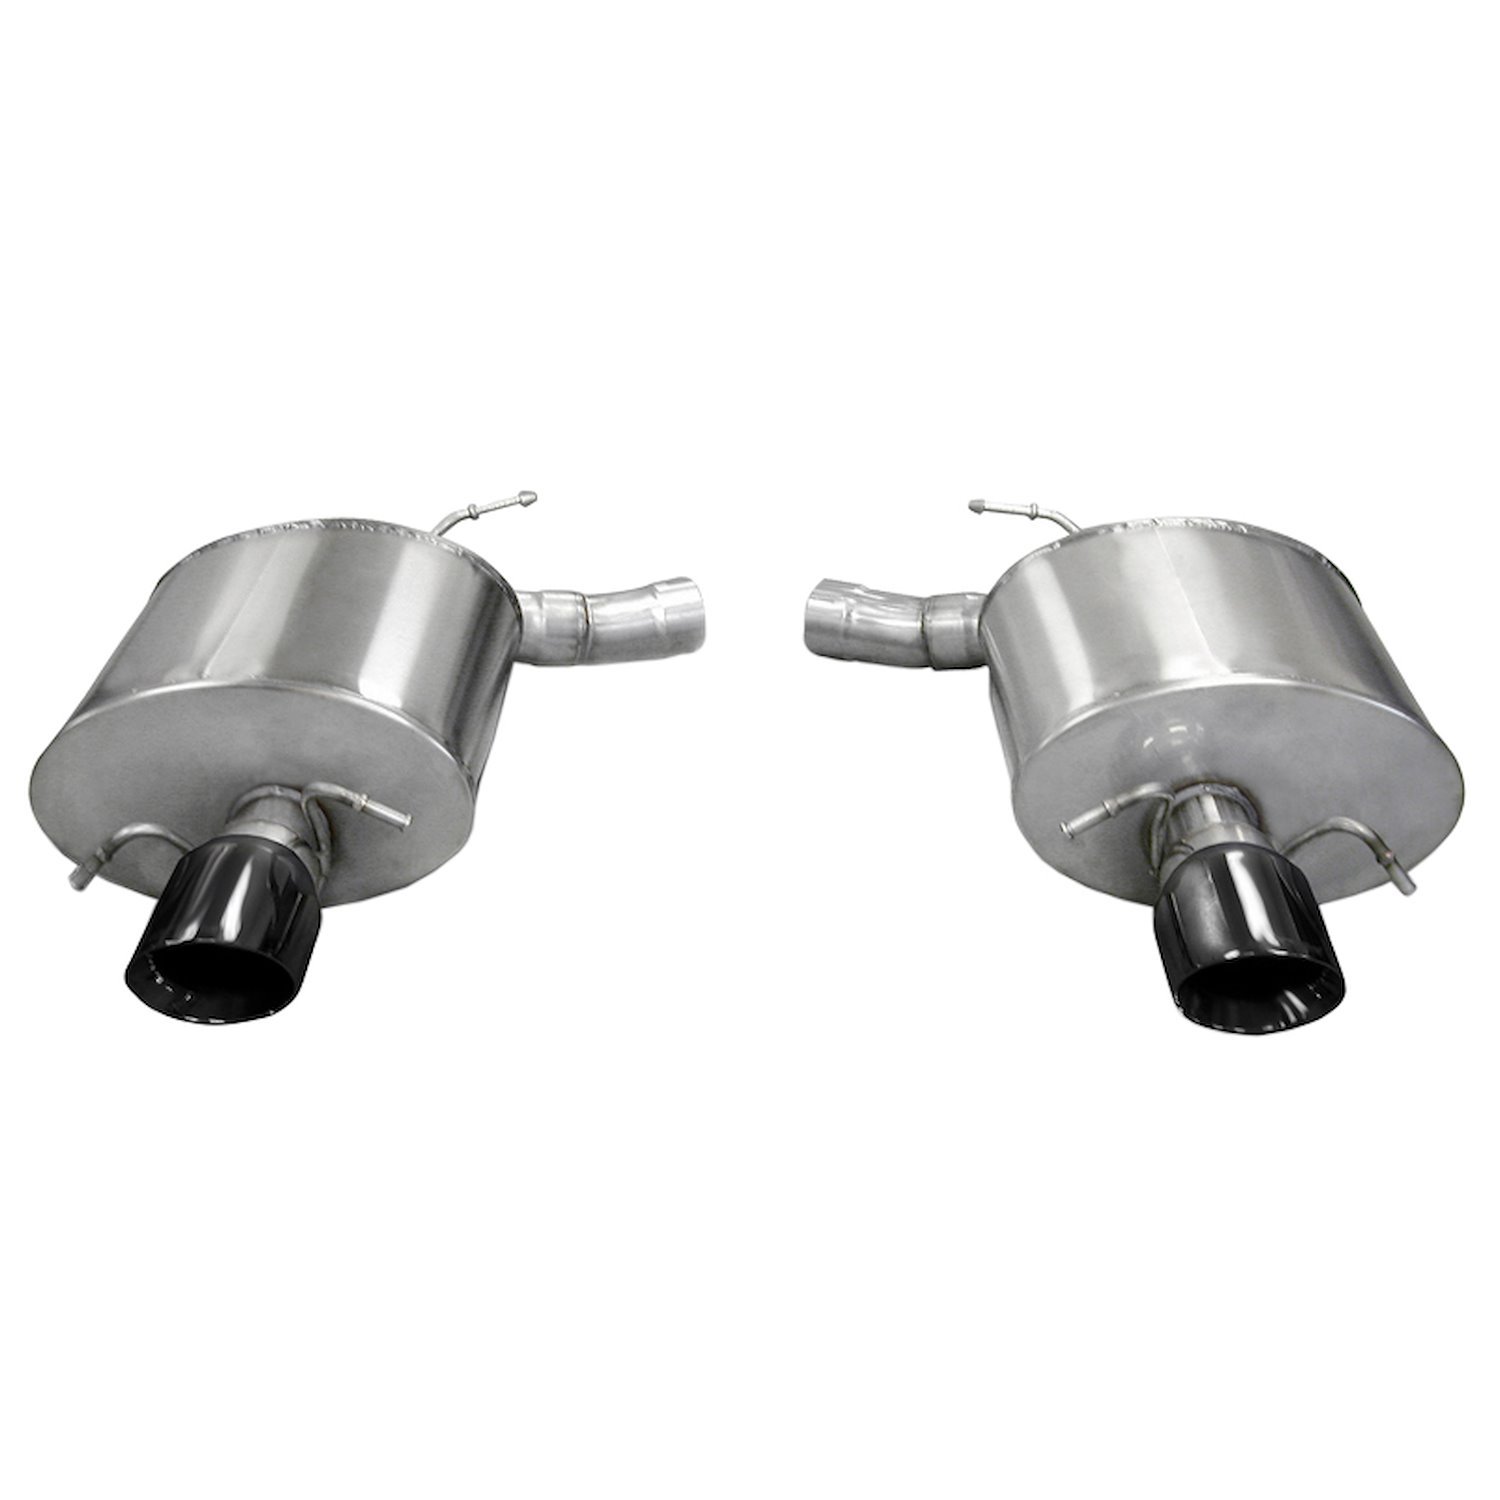 Touring Axle-Back Exhaust System 2009-2014 Cadillac CTS-V Sedan 6.2L